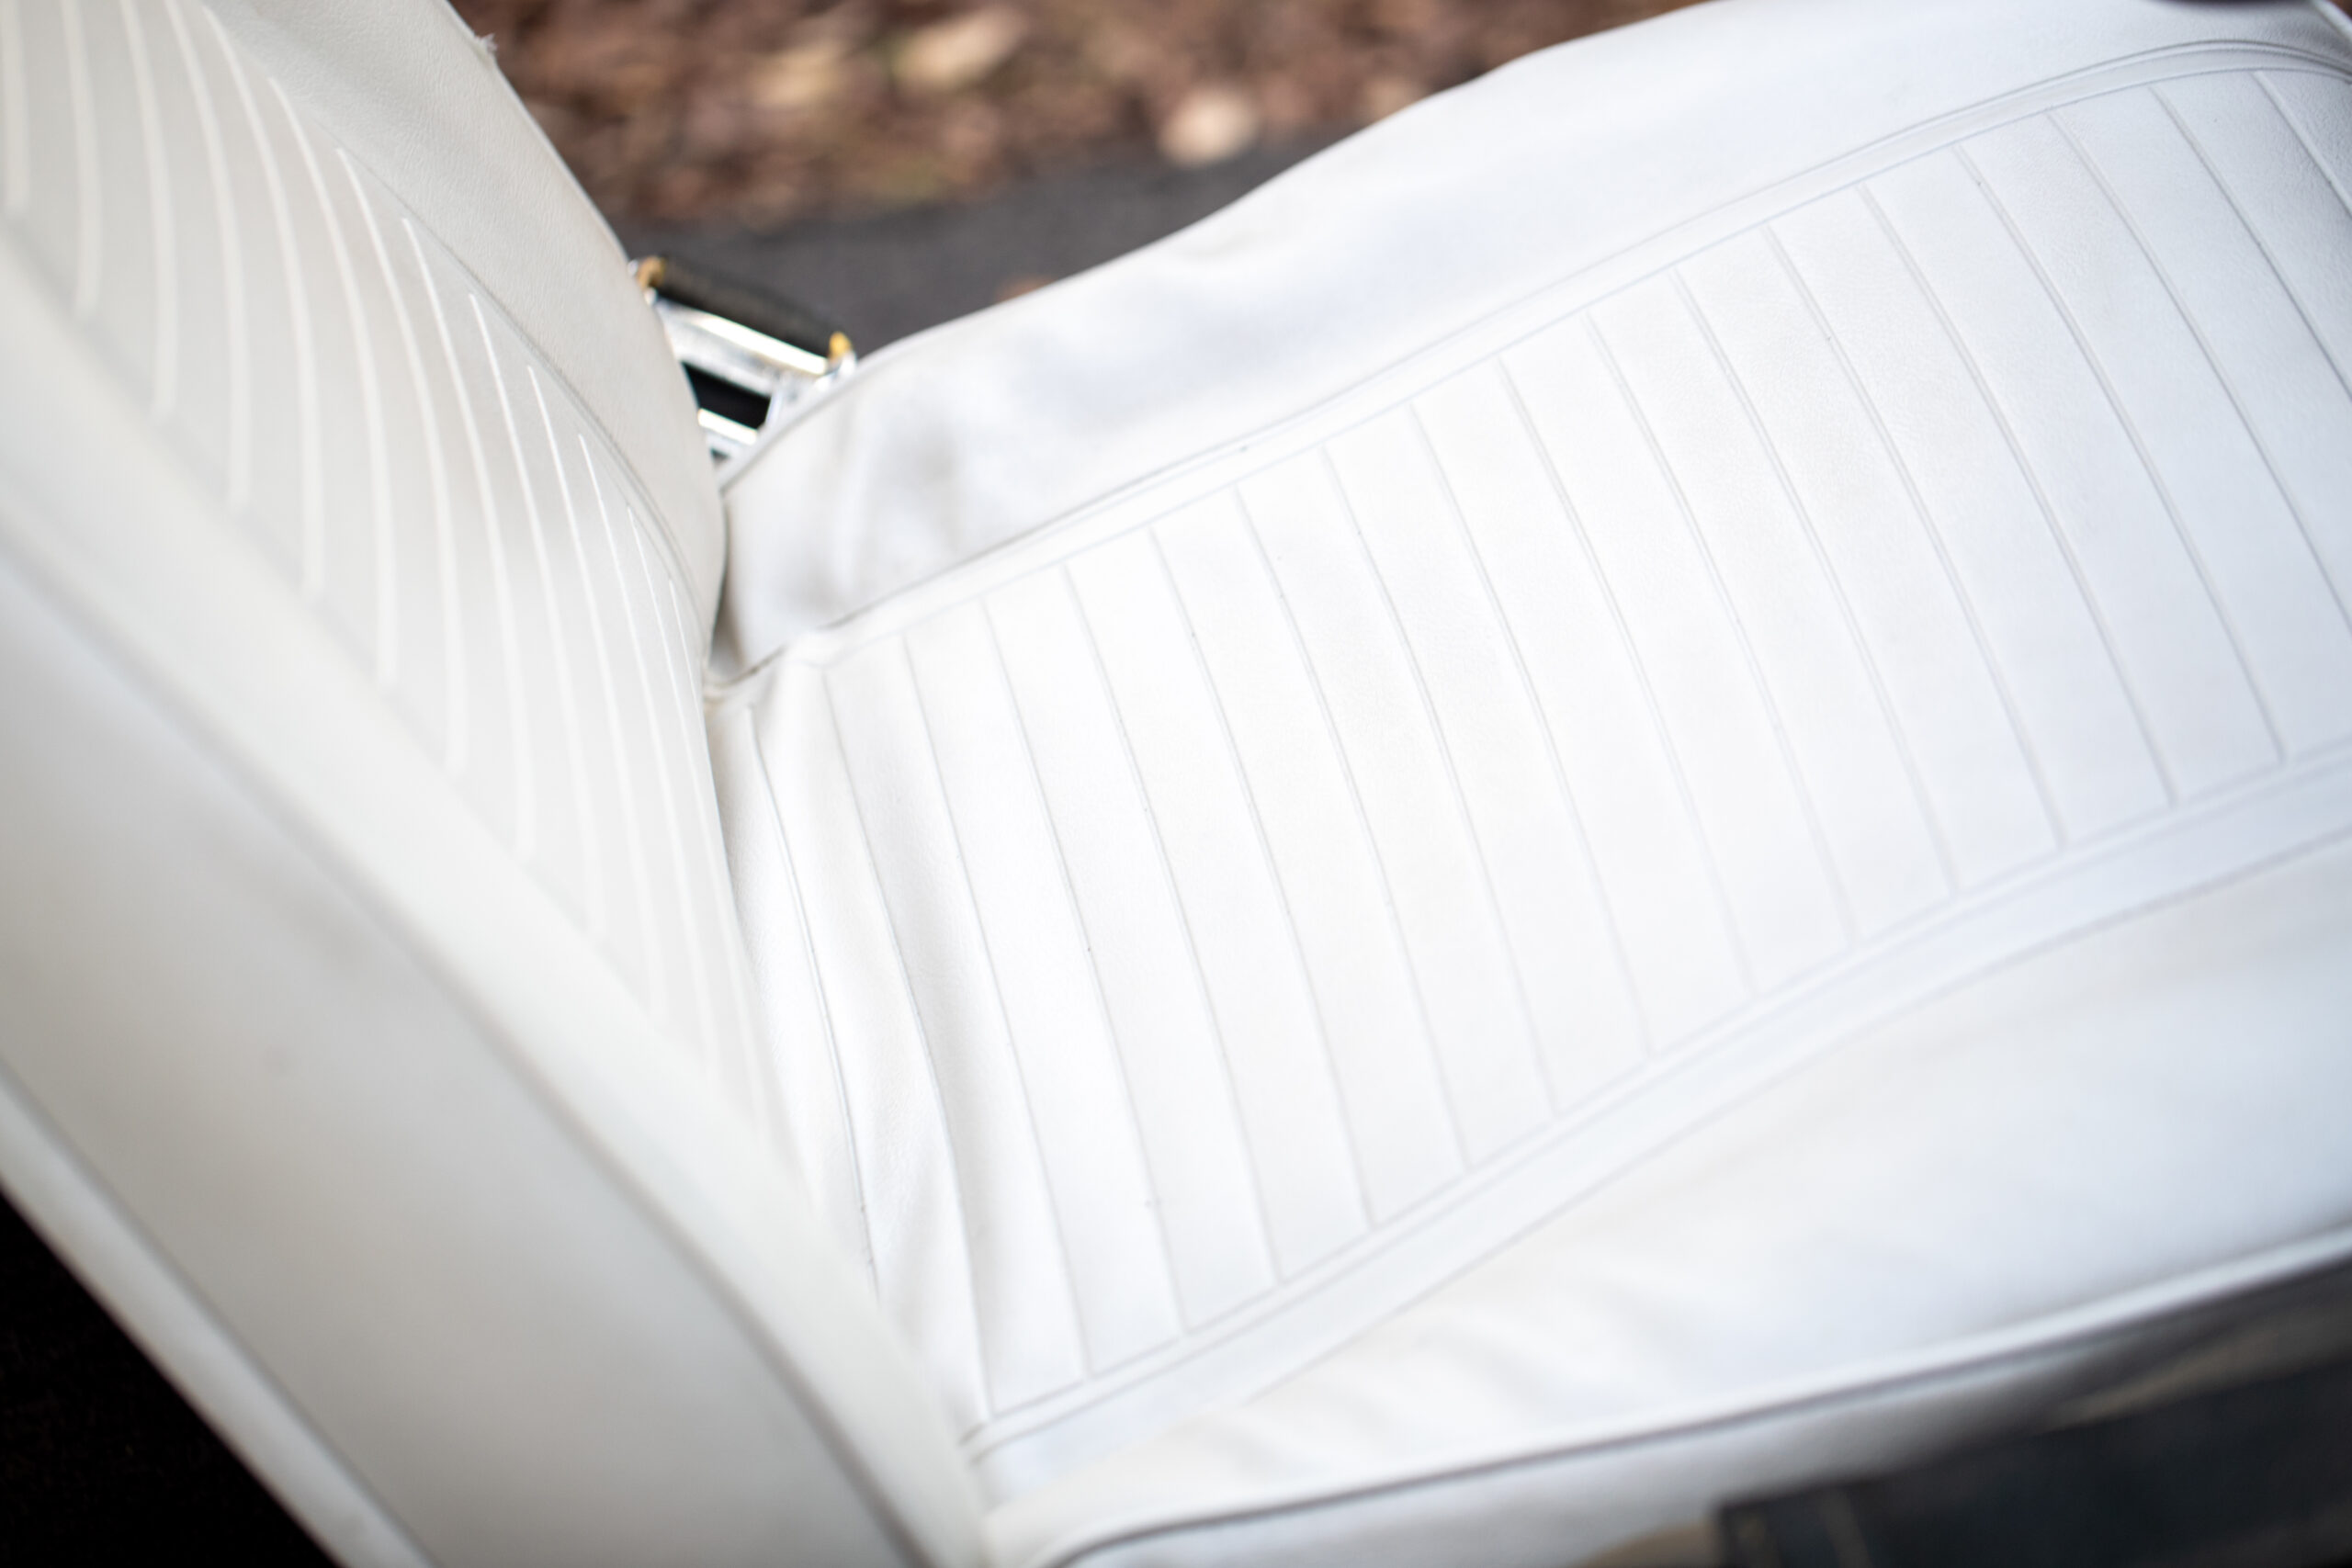 Close-up of a car's white leather seat with vertical stitching details. The background is slightly blurred.